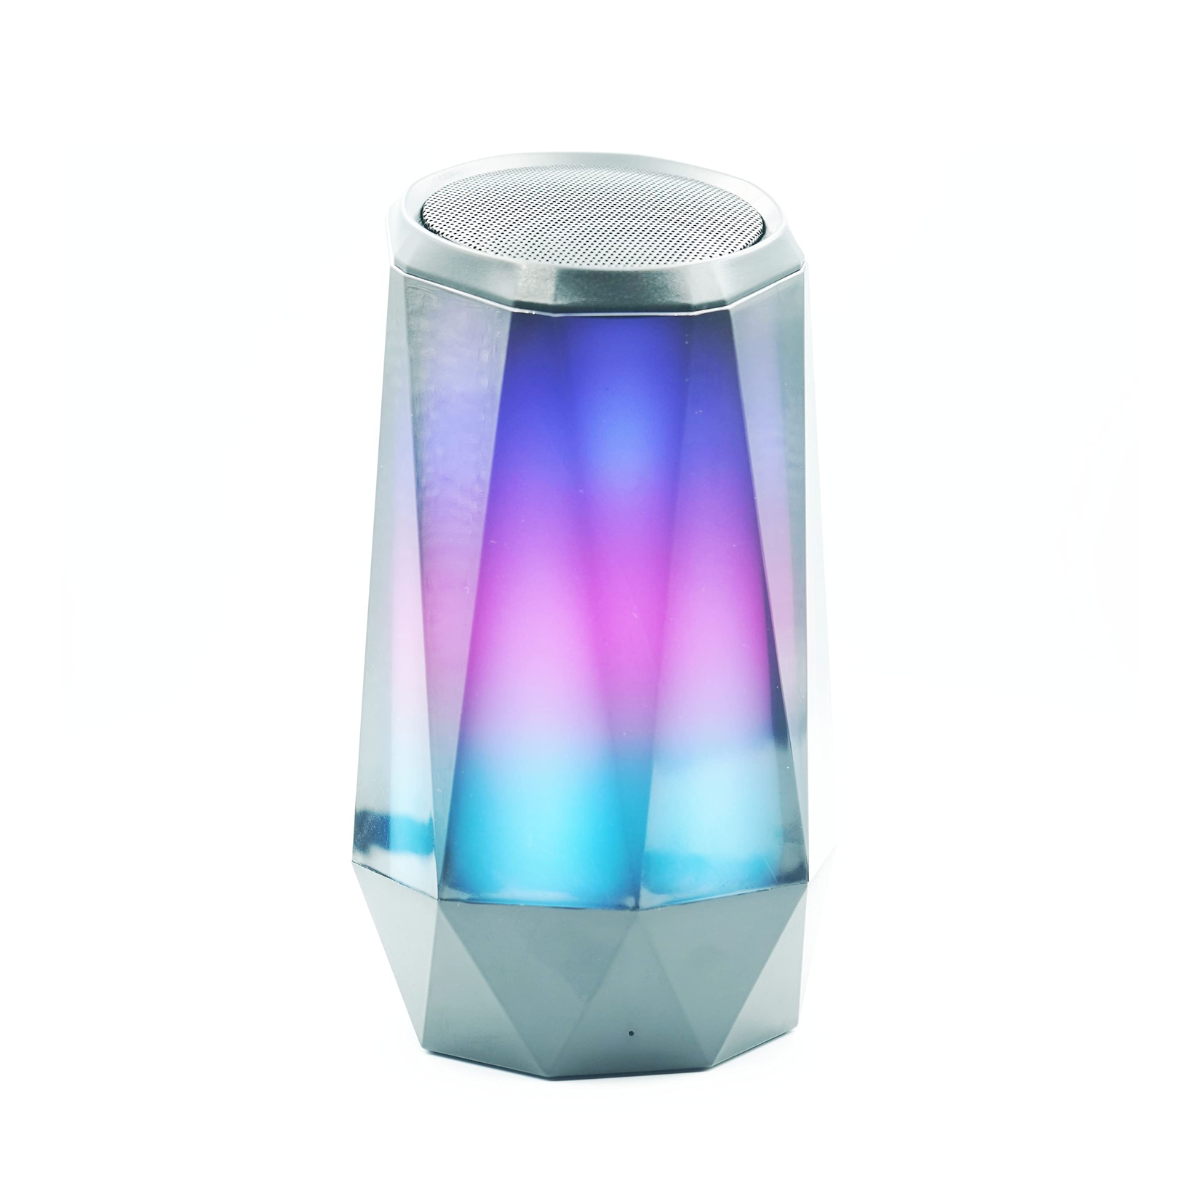 37. Bring Music to Your 15th Anniversary Celebration with This Crystal-Embedded Bluetooth Speaker